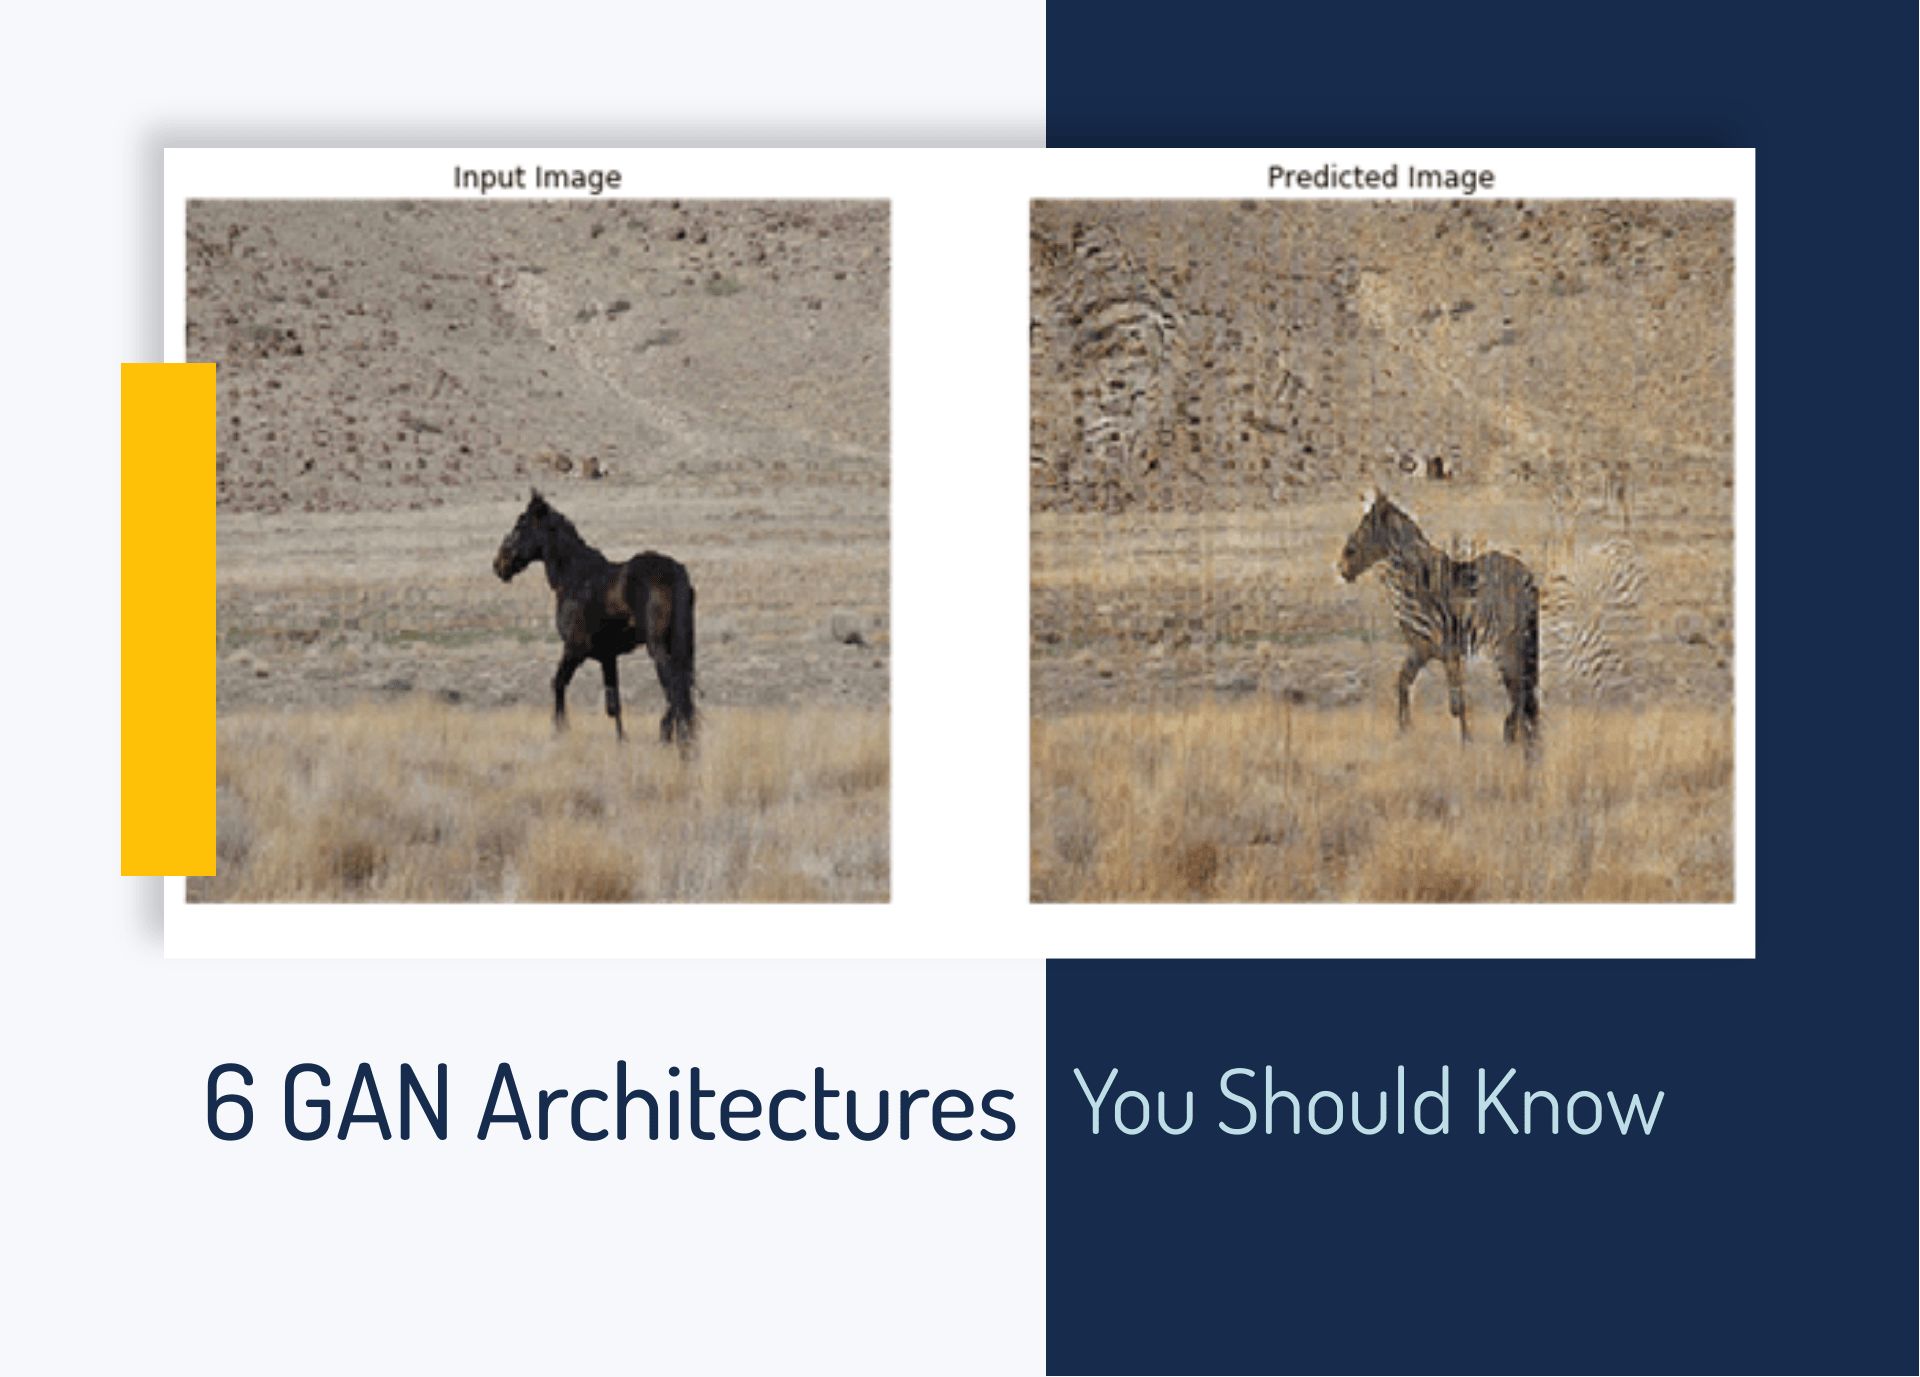 6 GAN Architectures Every Data Scientist Should Know